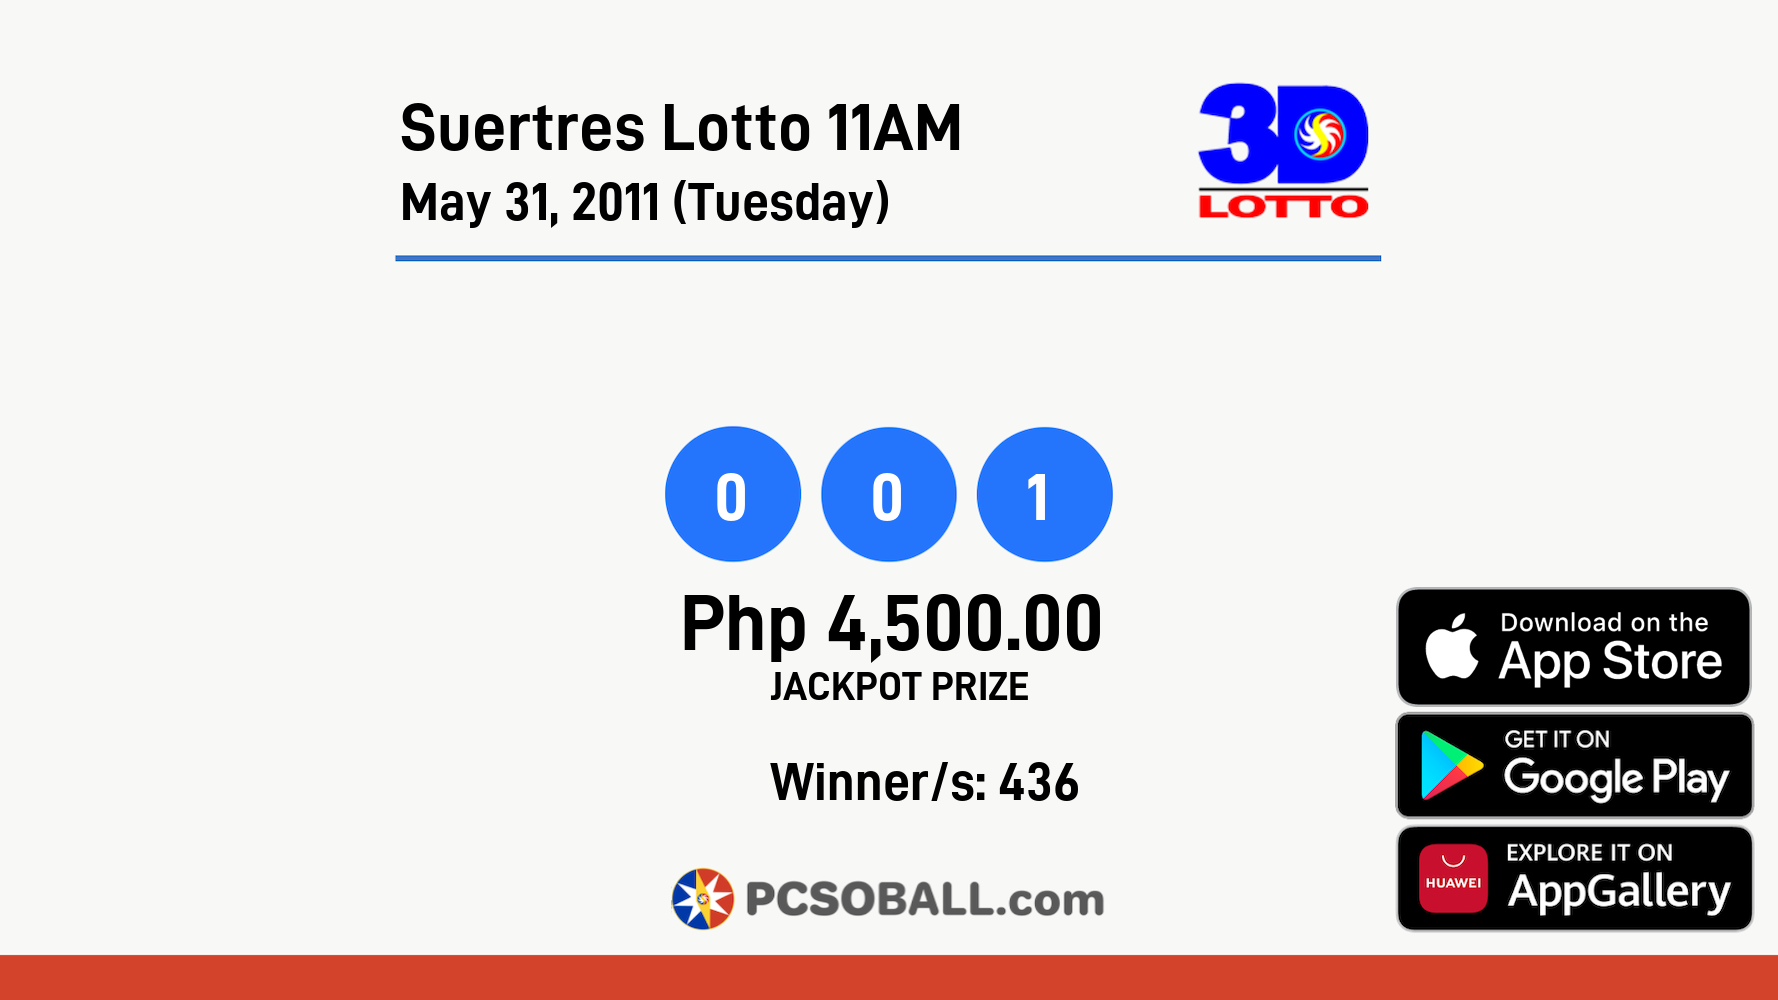 Suertres Lotto 11AM May 31, 2011 (Tuesday) Result